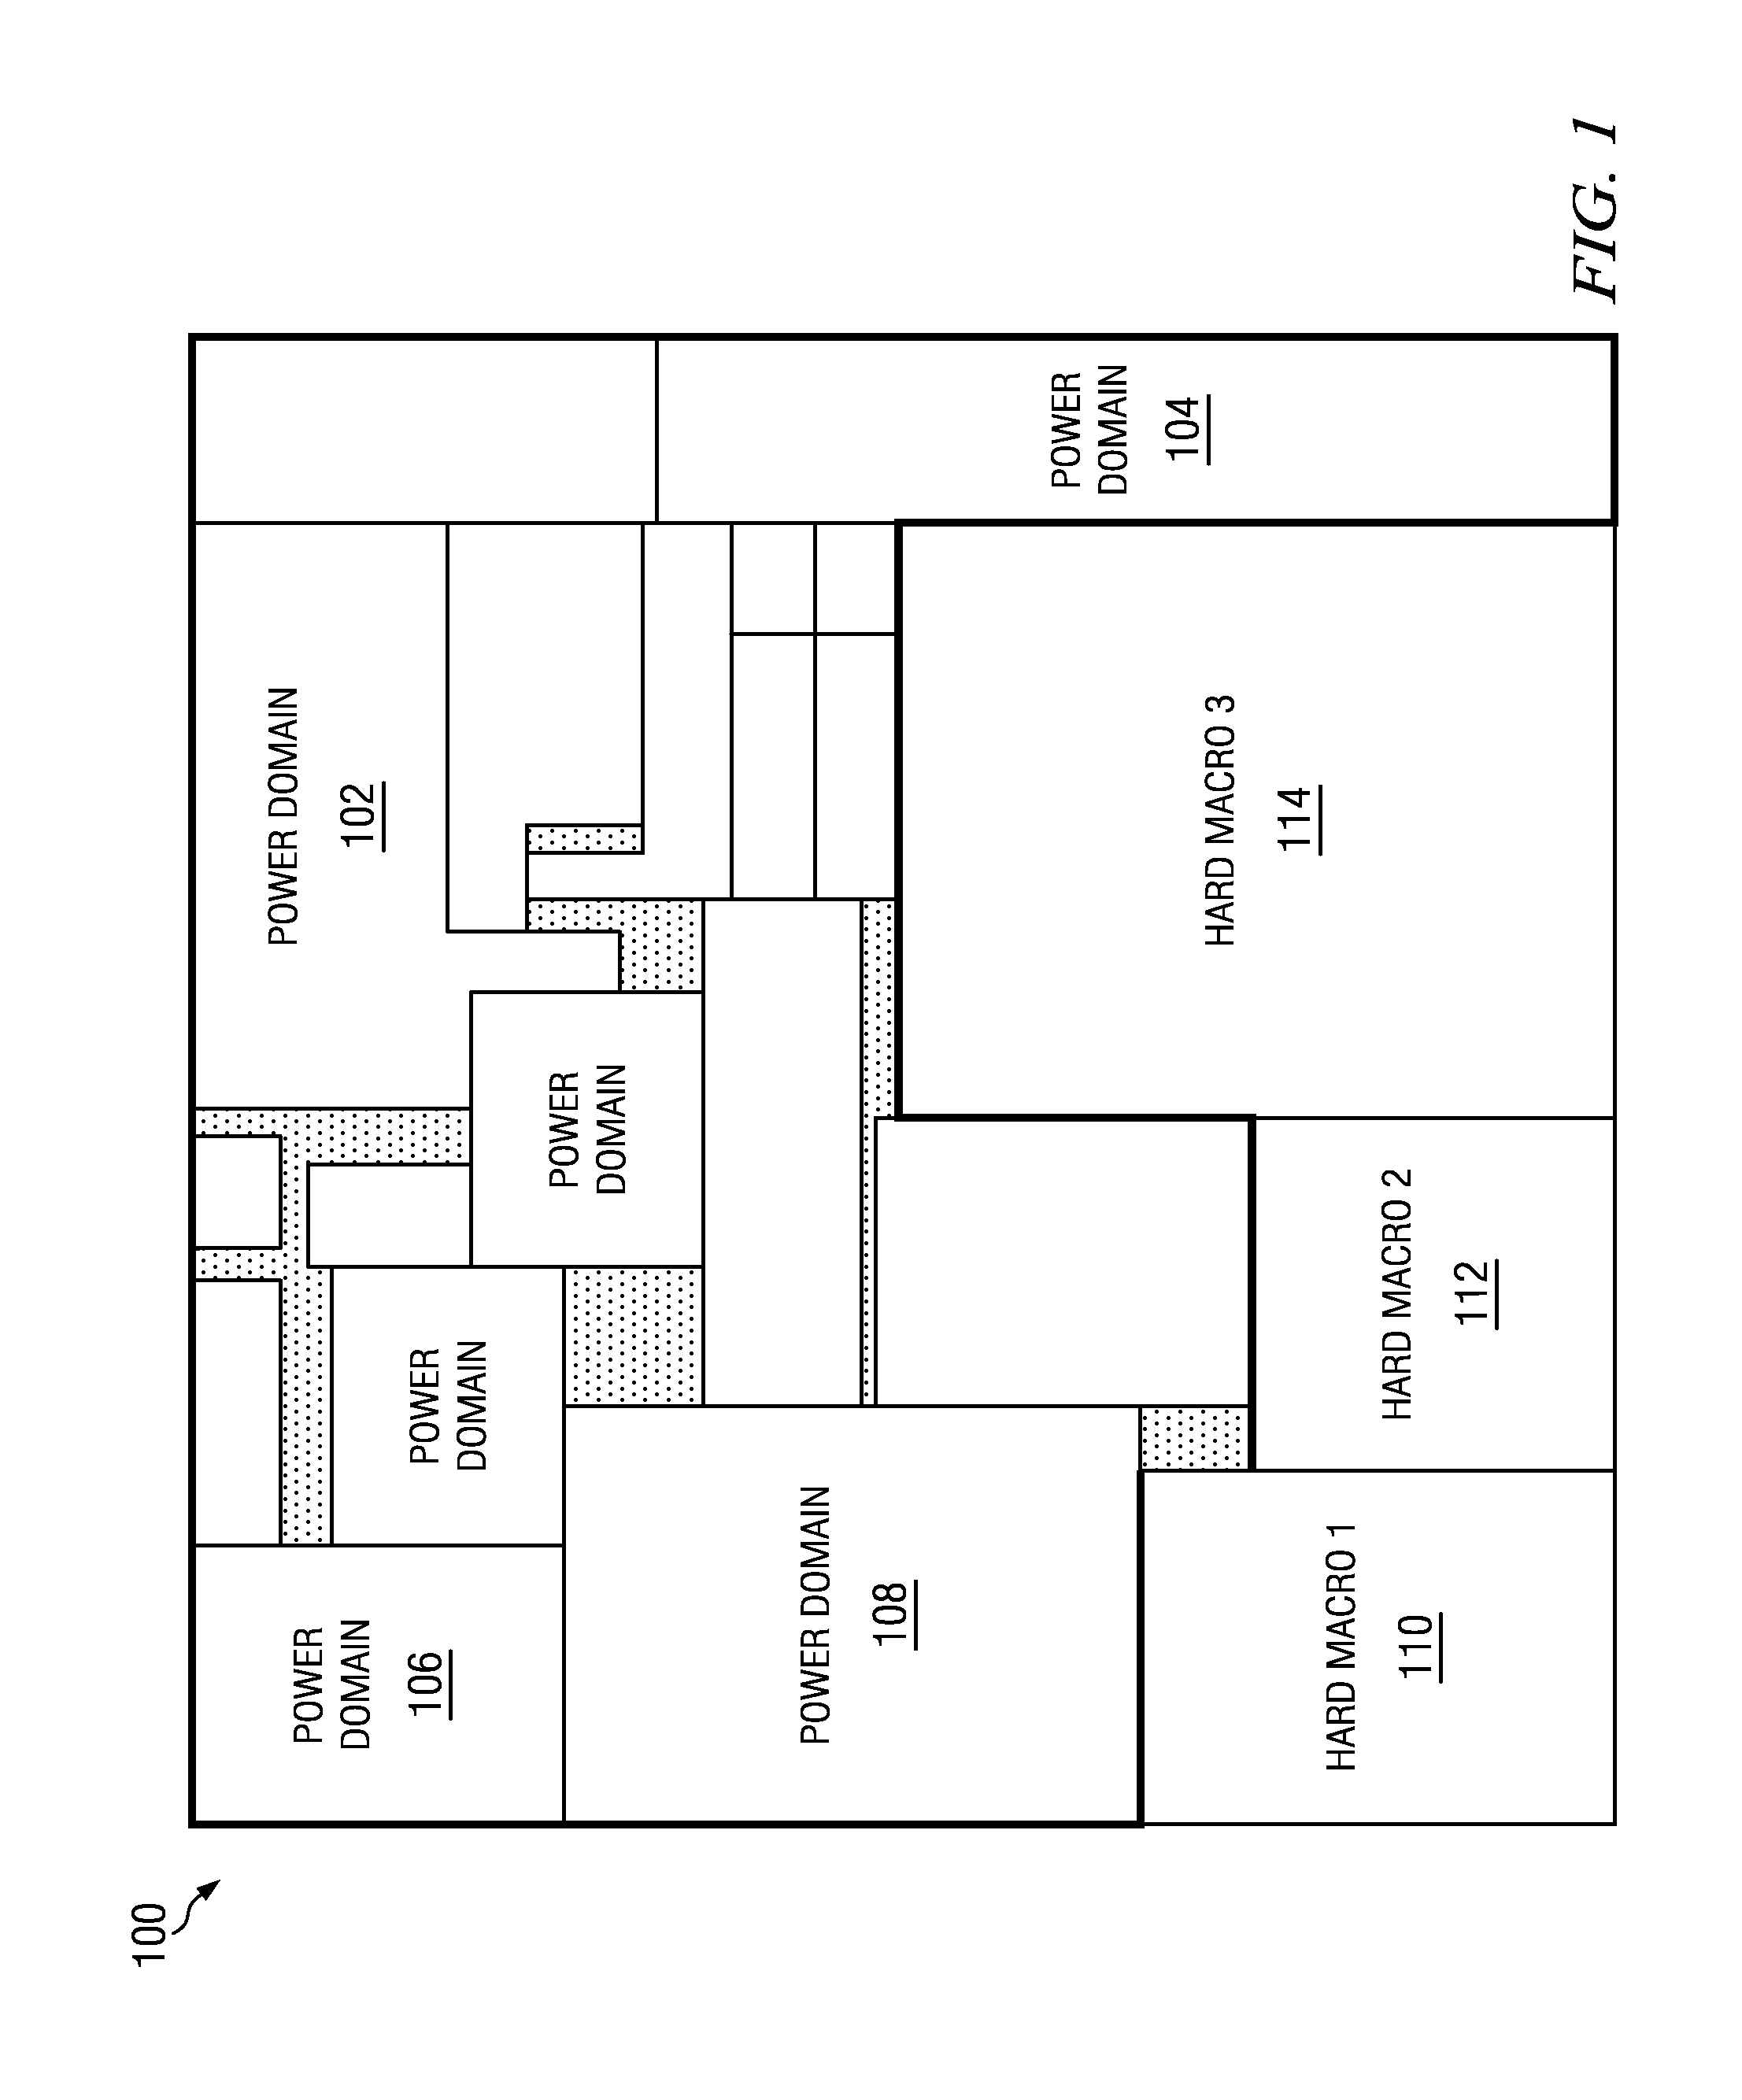 Method and system for adaptive physical design